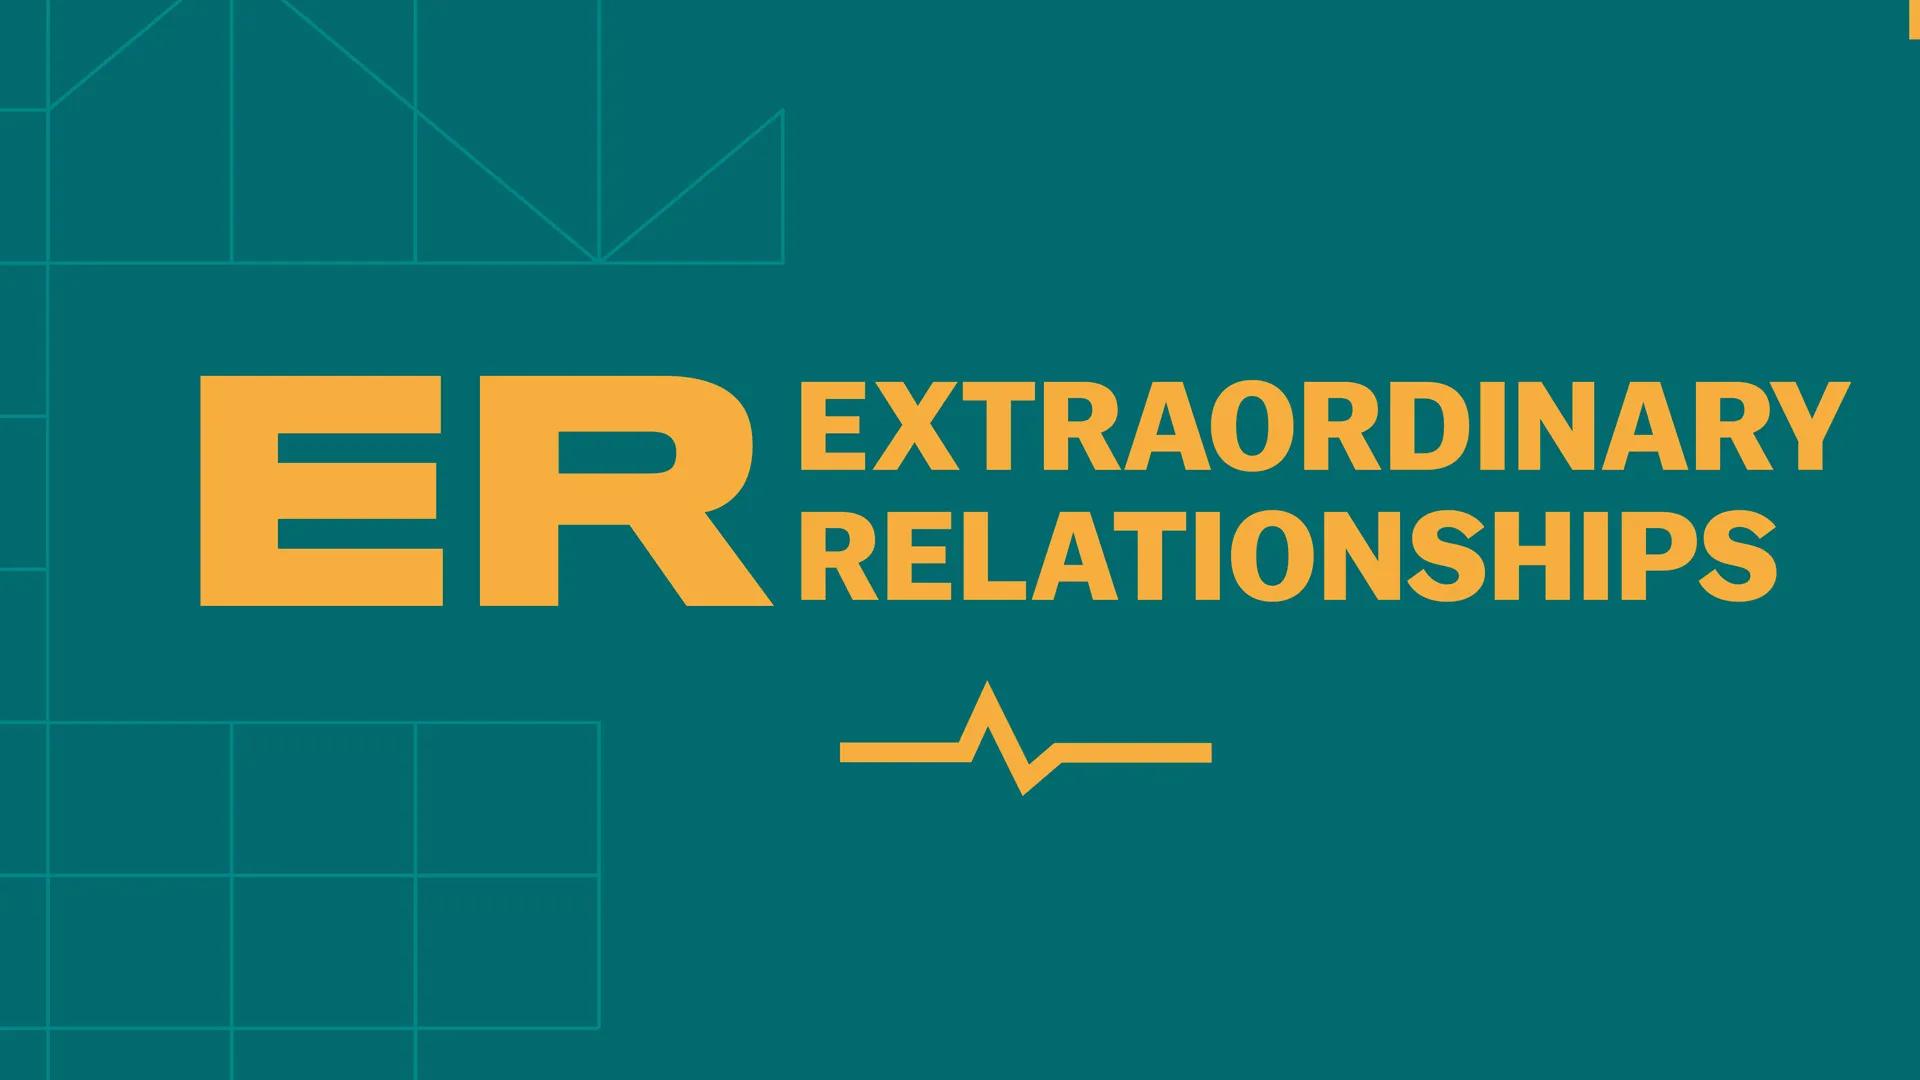 A teal background with yellow words that say "extraordinary relationship"